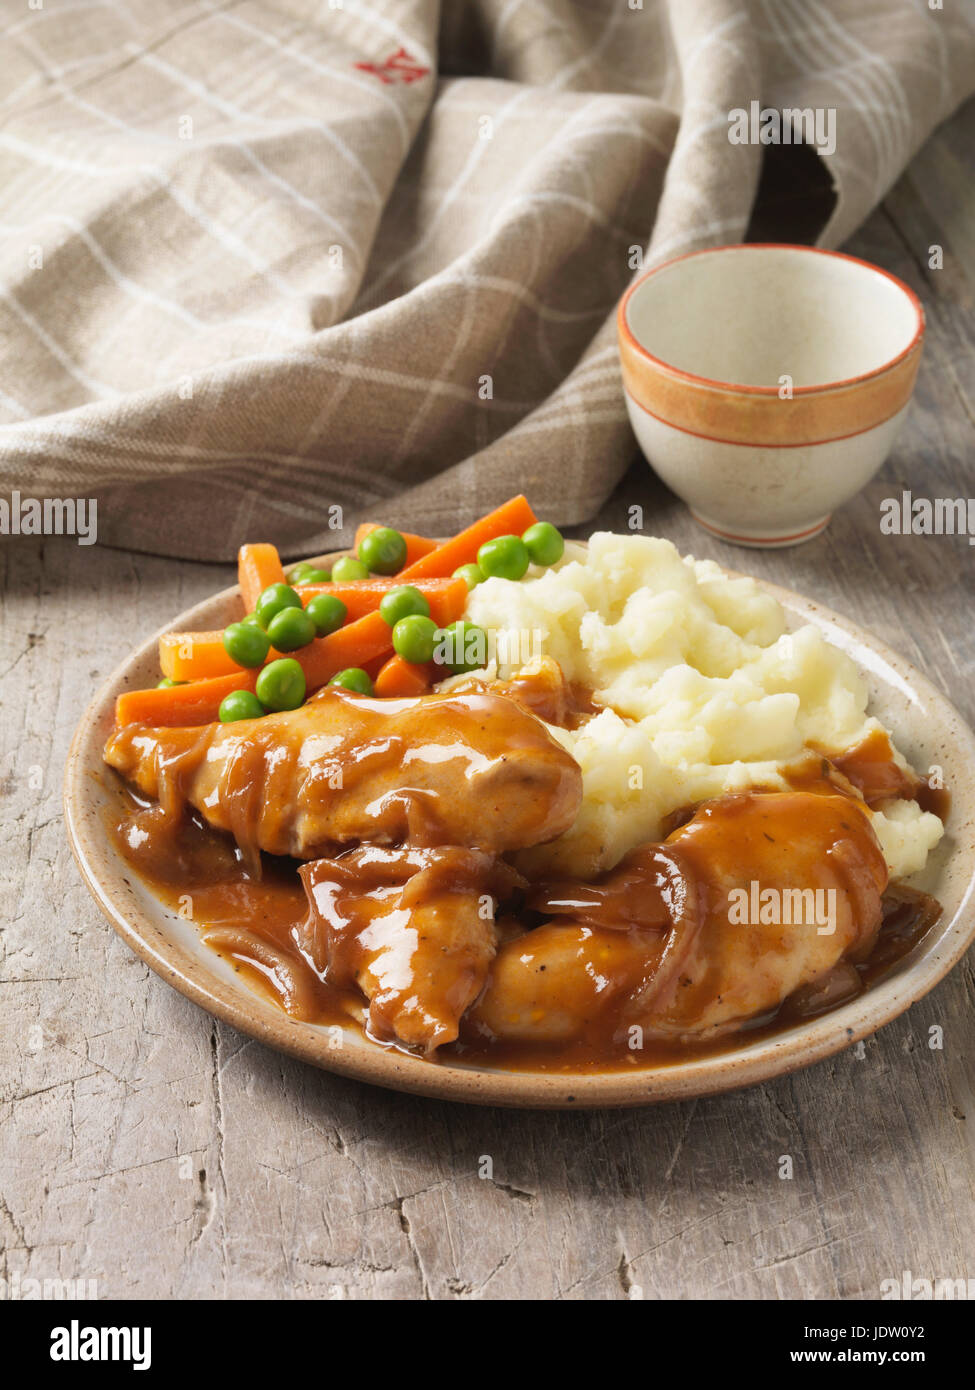 Plate of chicken, gravy and vegetables Stock Photo